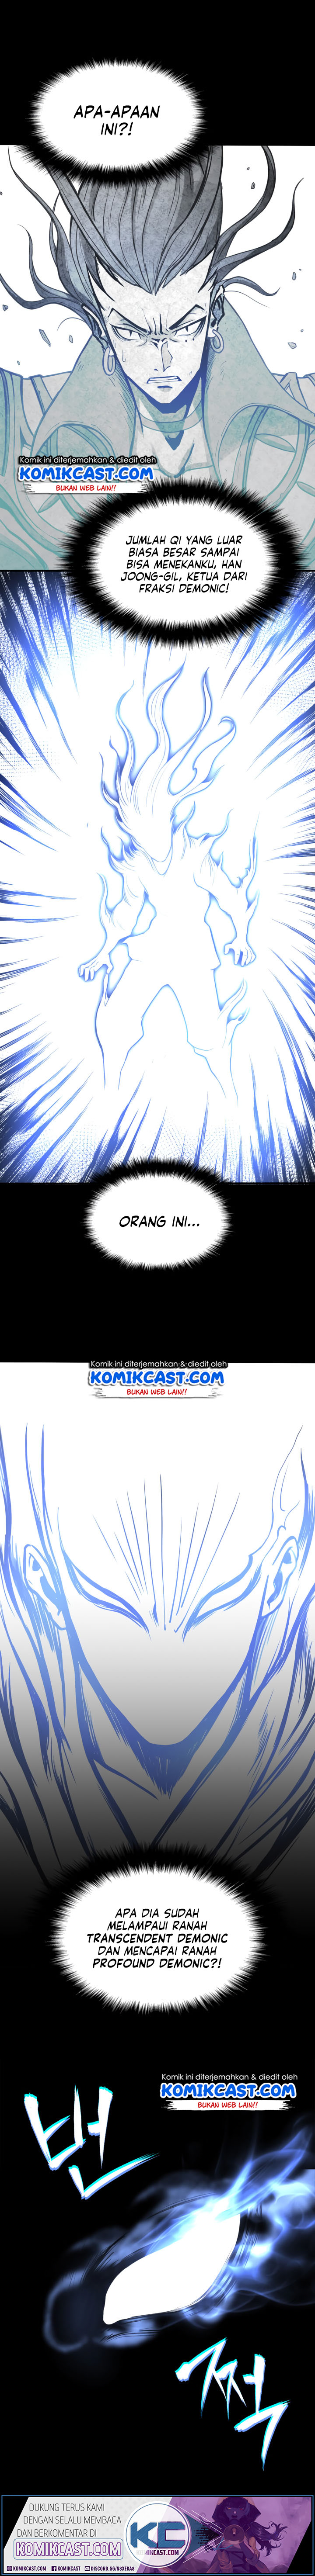 Mookhyang The Origin Chapter 01 4